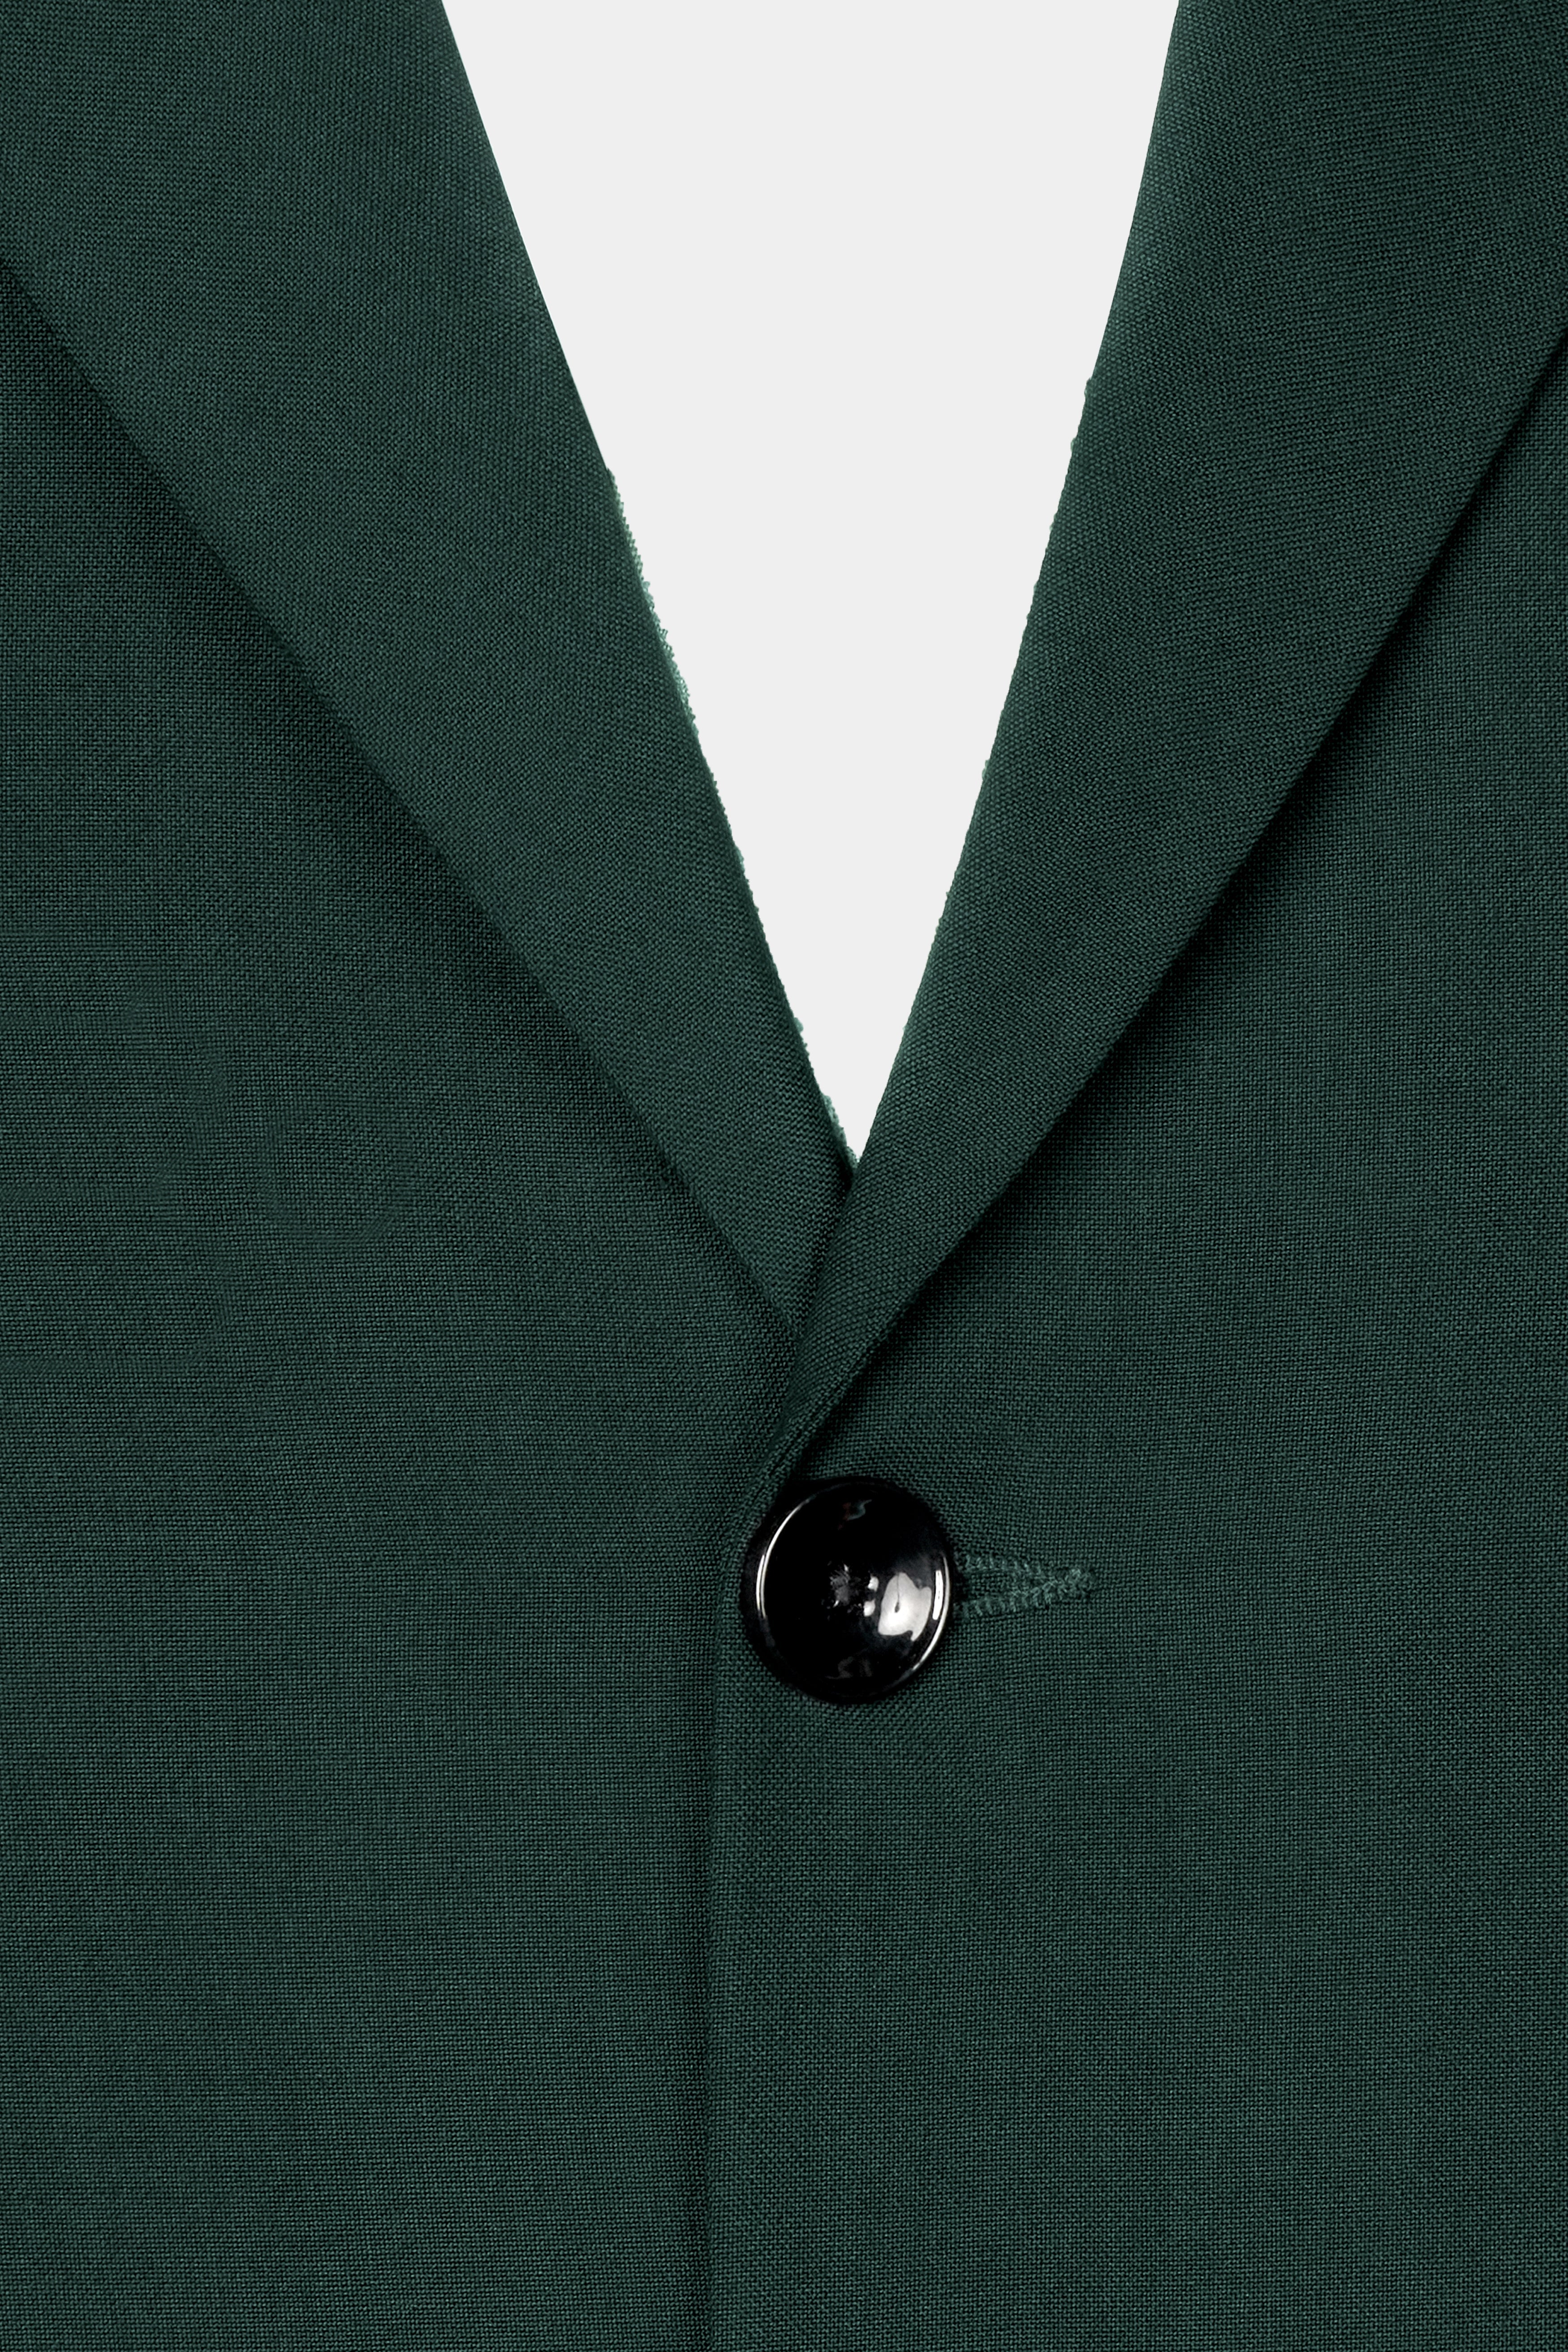 Gable Green Single Breasted Wool Rich Suit ST2728-SB-36, ST2728-SB-38, ST2728-SB-40, ST2728-SB-42, ST2728-SB-44, ST2728-SB-46, ST2728-SB-48, ST2728-SB-50, ST2728-SB-52, ST2728-SB-54, ST2728-SB-56, ST2728-SB-58, ST2728-SB-60